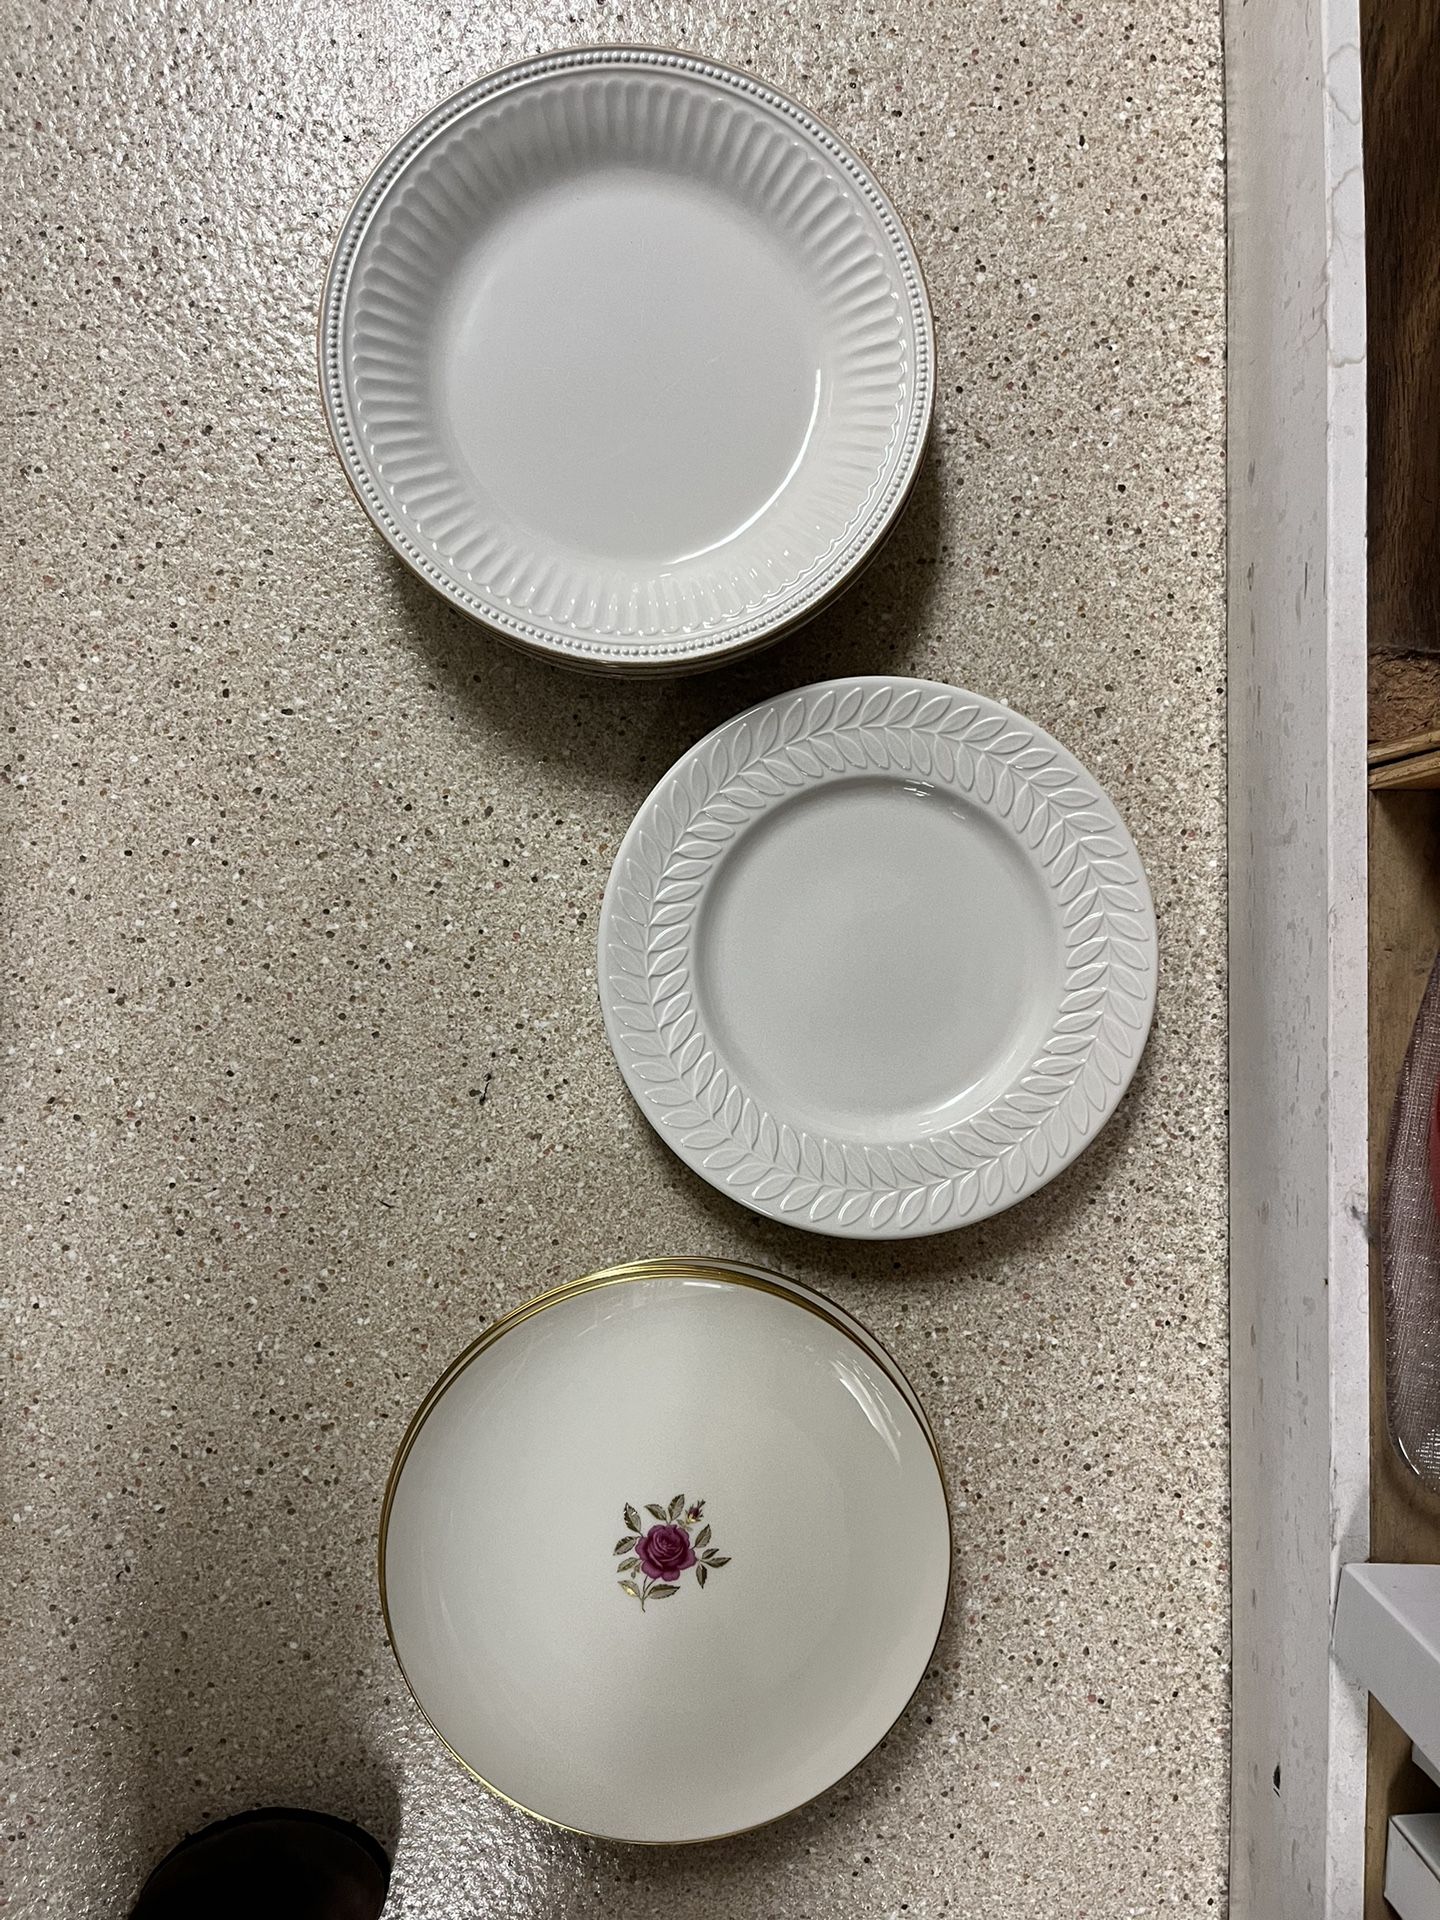 Collection Of Vintage Plates